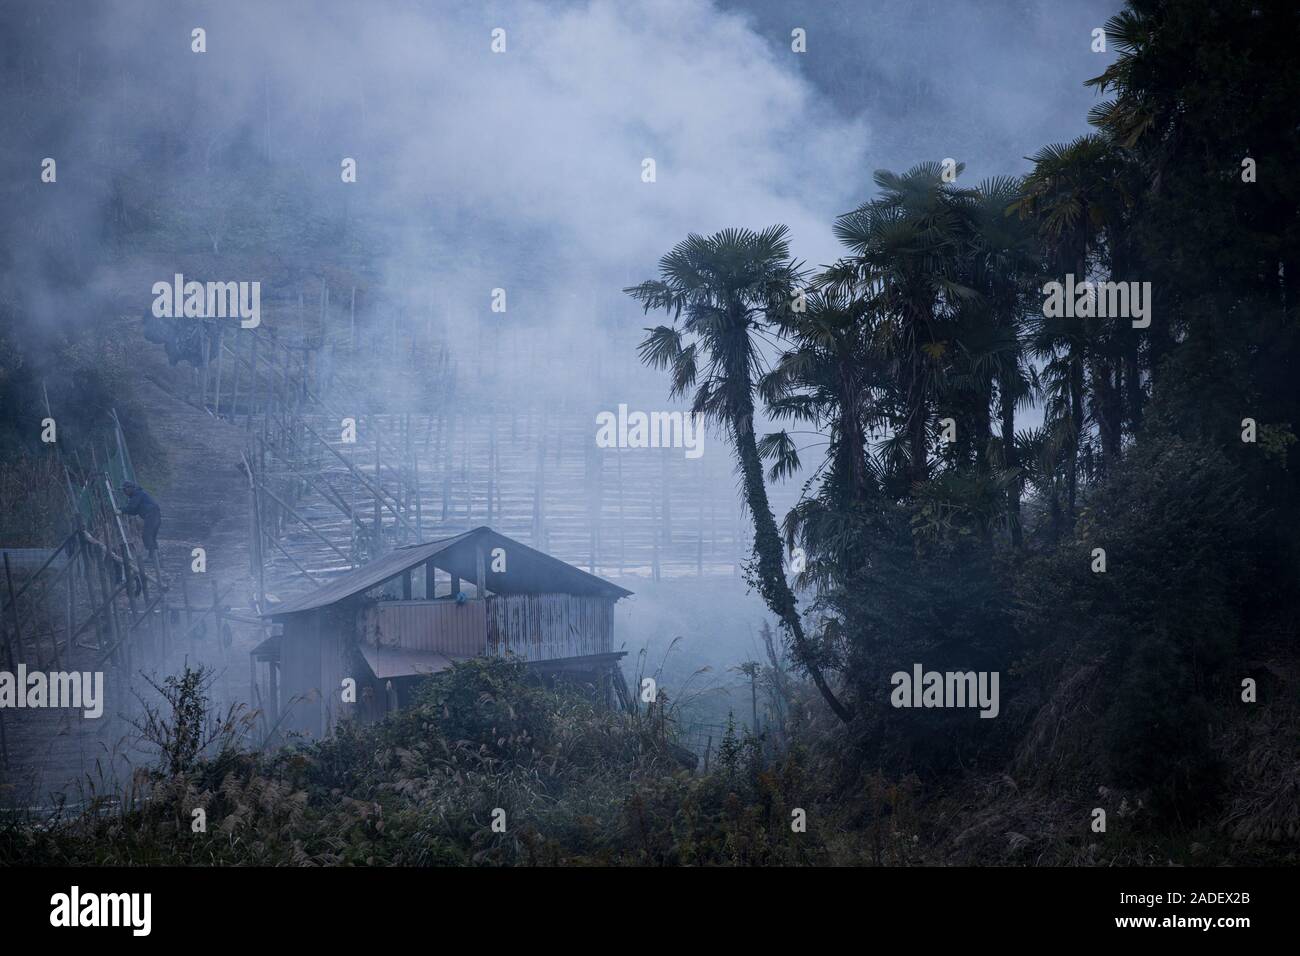 Smoke from burning agricultural waste billows over small shack in rural Japanese mountains Stock Photo